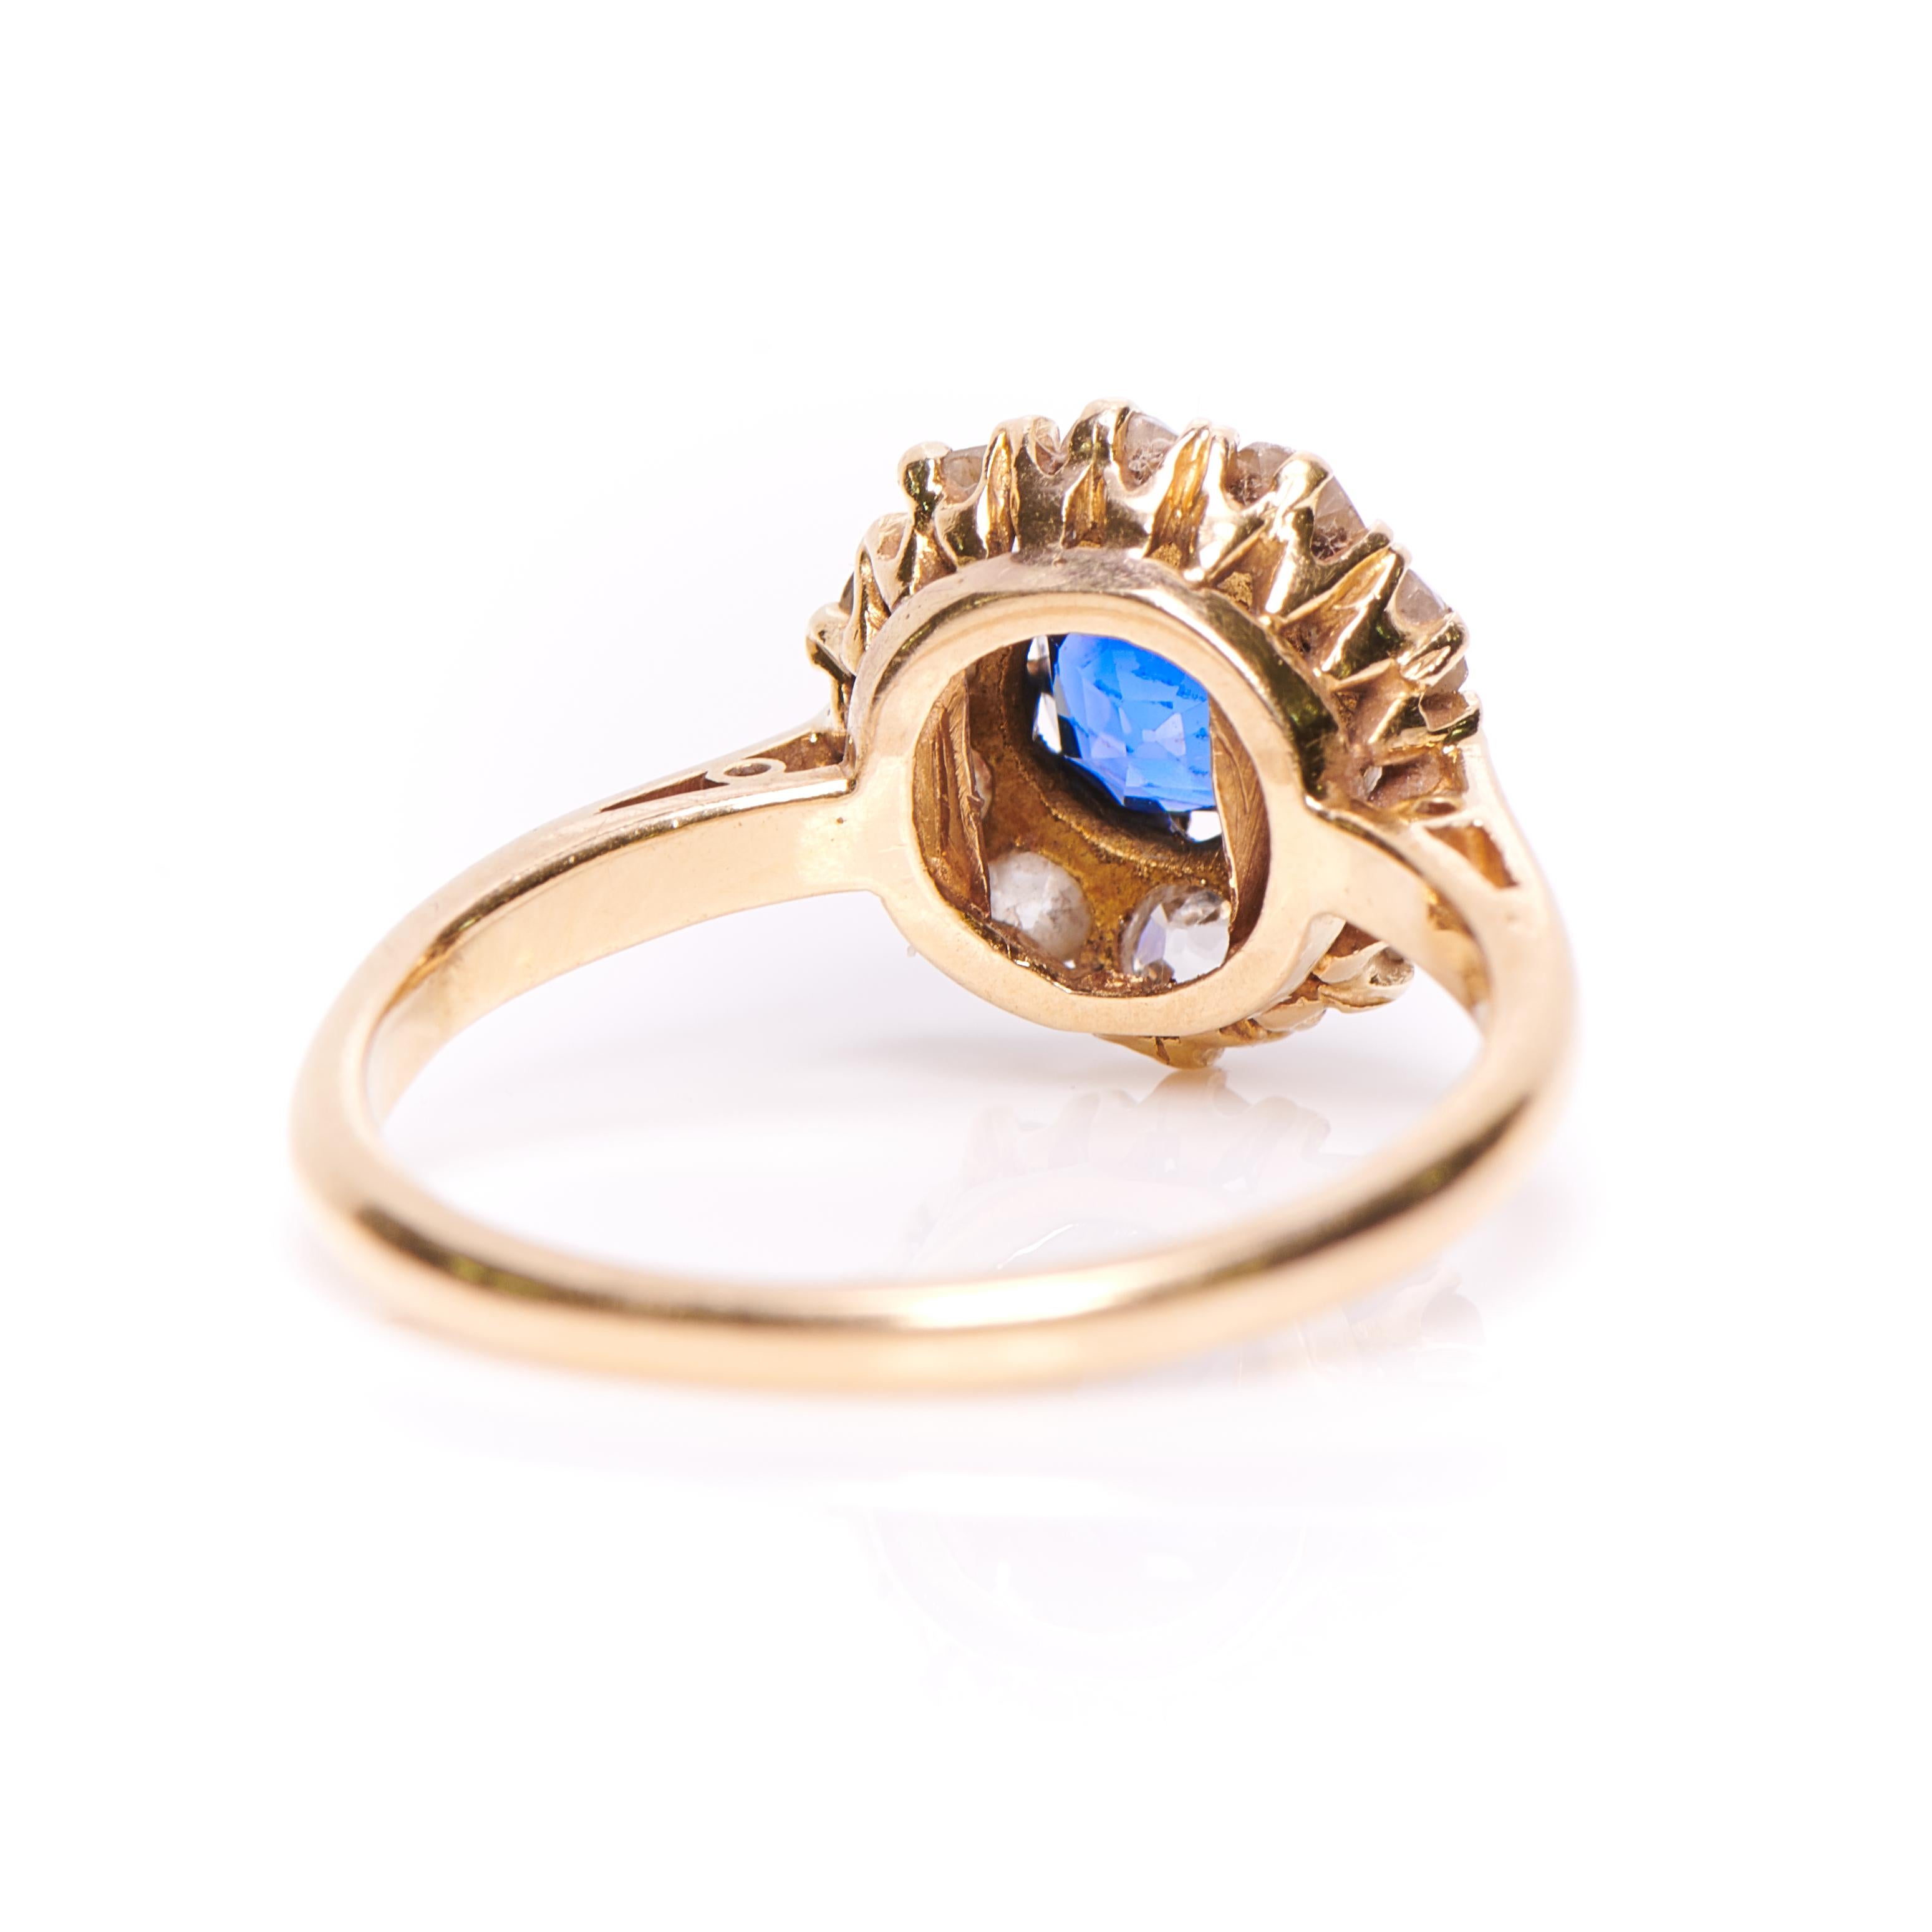 A beautifully simple sapphire and diamond cluster ring, circa 1900. A vibrant blue sapphire sits in the centre, encircled by a single row of old cut diamonds in a typical late Victorian/early Edwardian coronet setting crafted in yellow gold. The